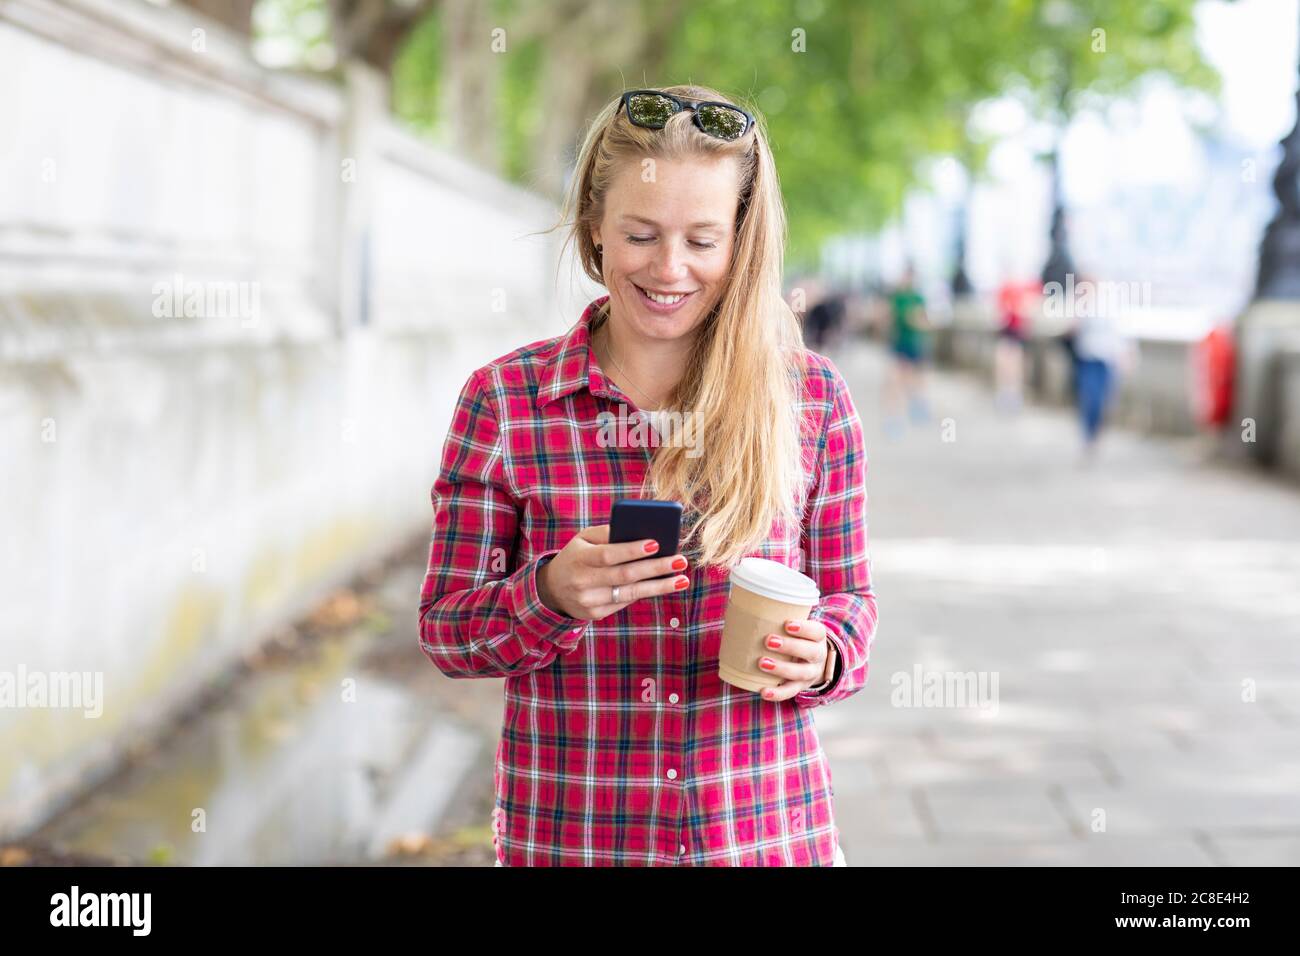 Smiling mid adult woman holding coffee using mobile phone while standing on footpath Stock Photo